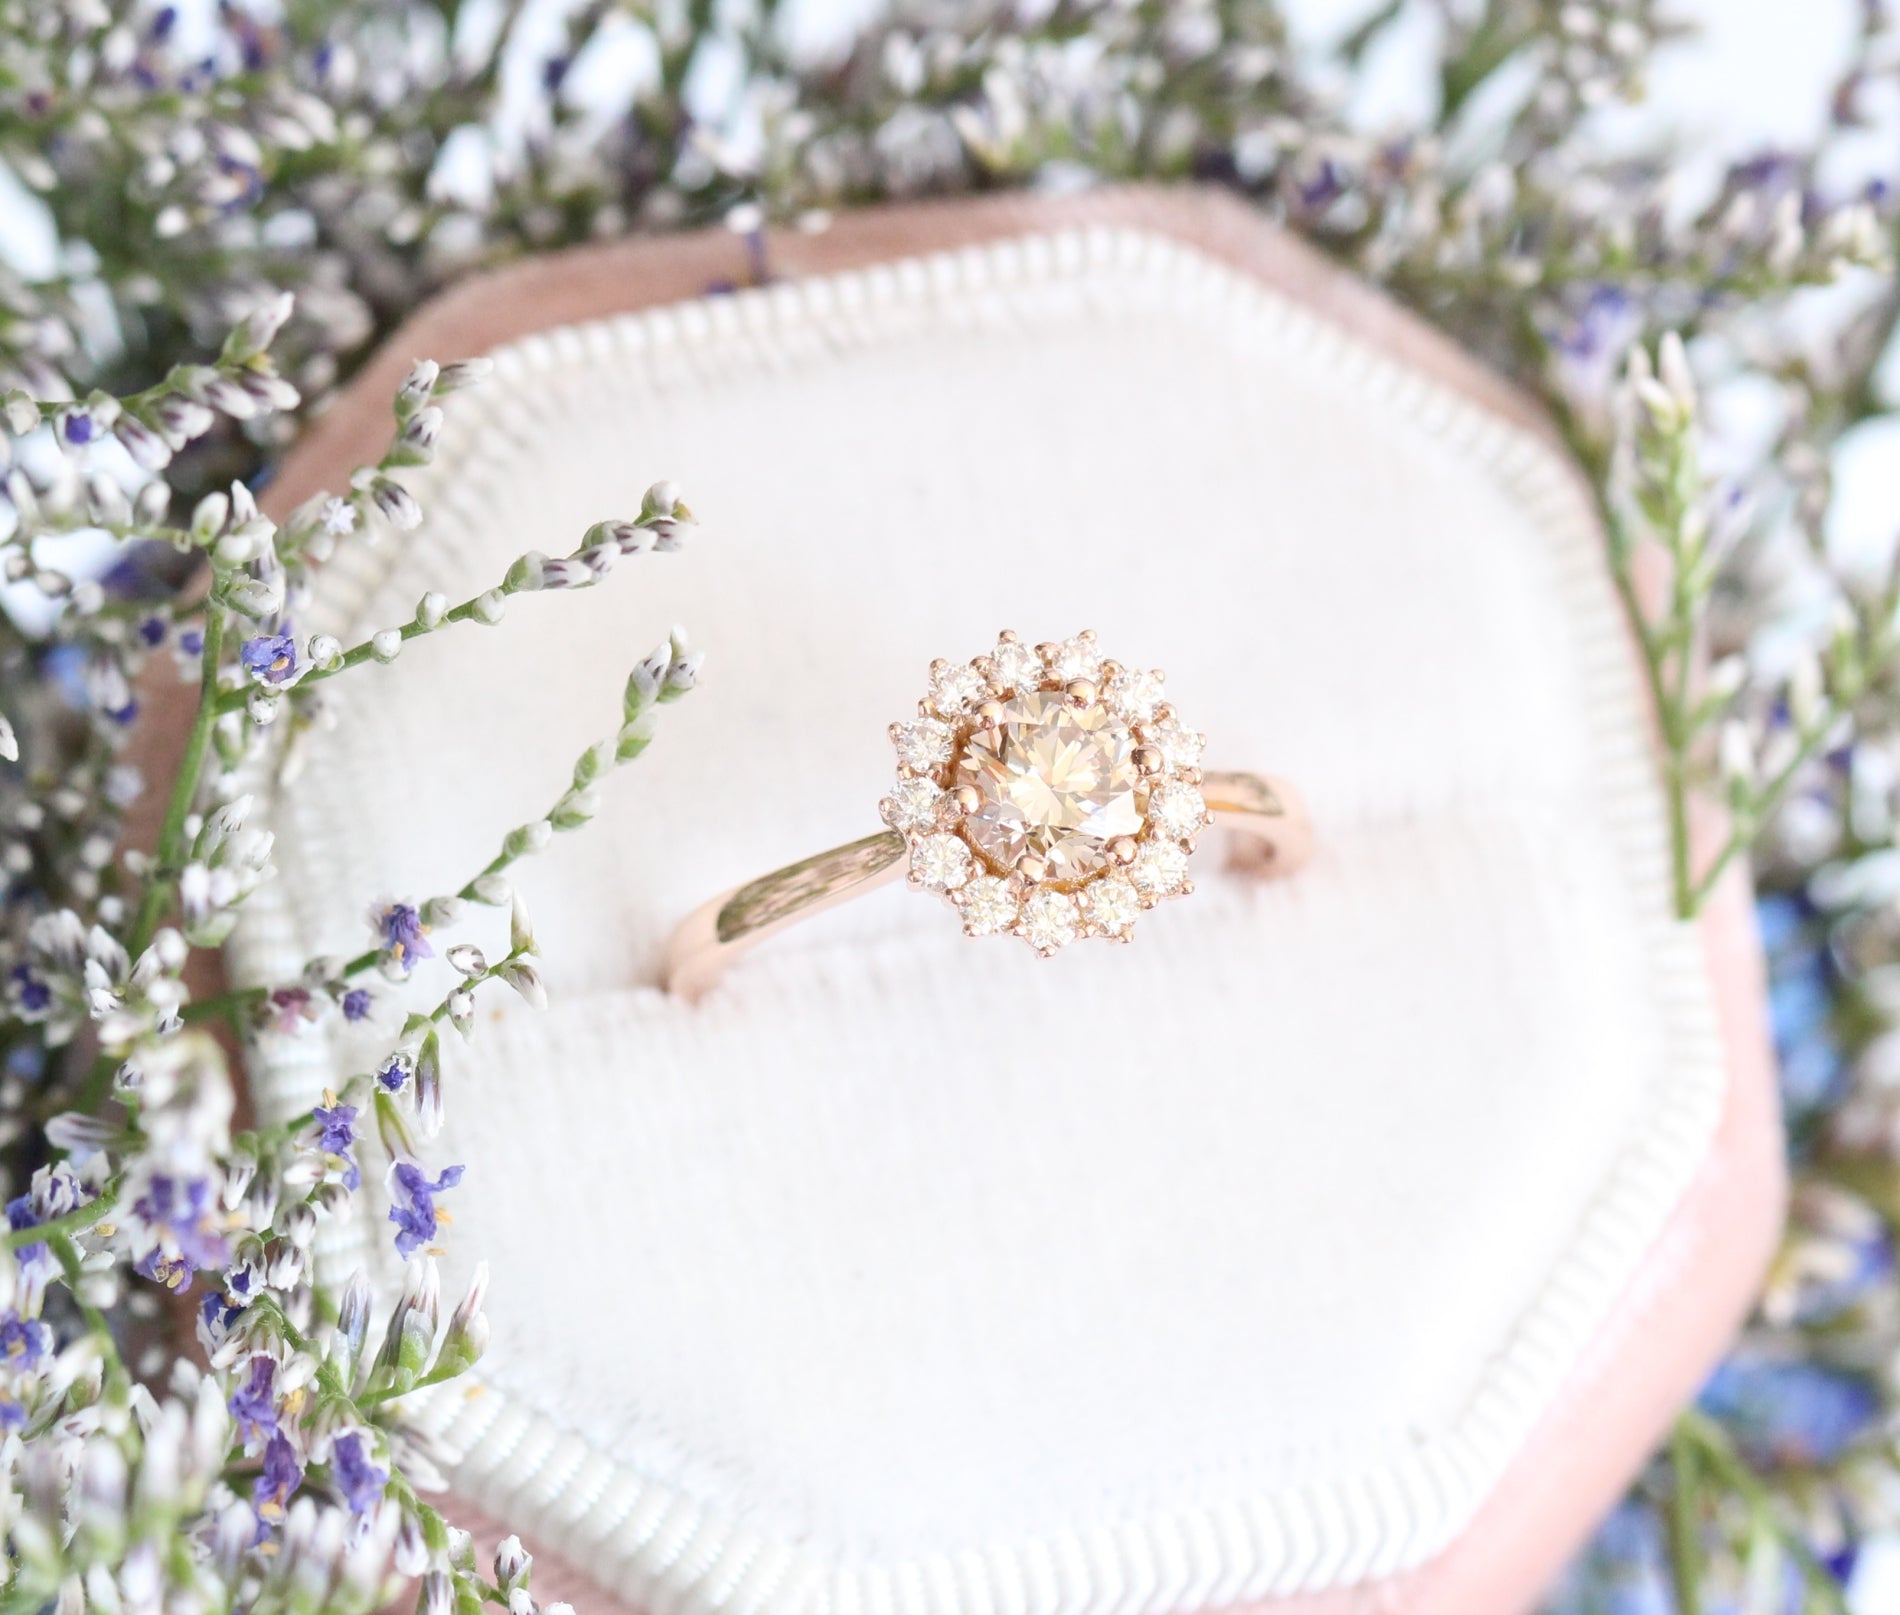 Champagne Diamond Engagement Ring in Rose Gold Cluster Diamond Ring by La More Design Jewelry